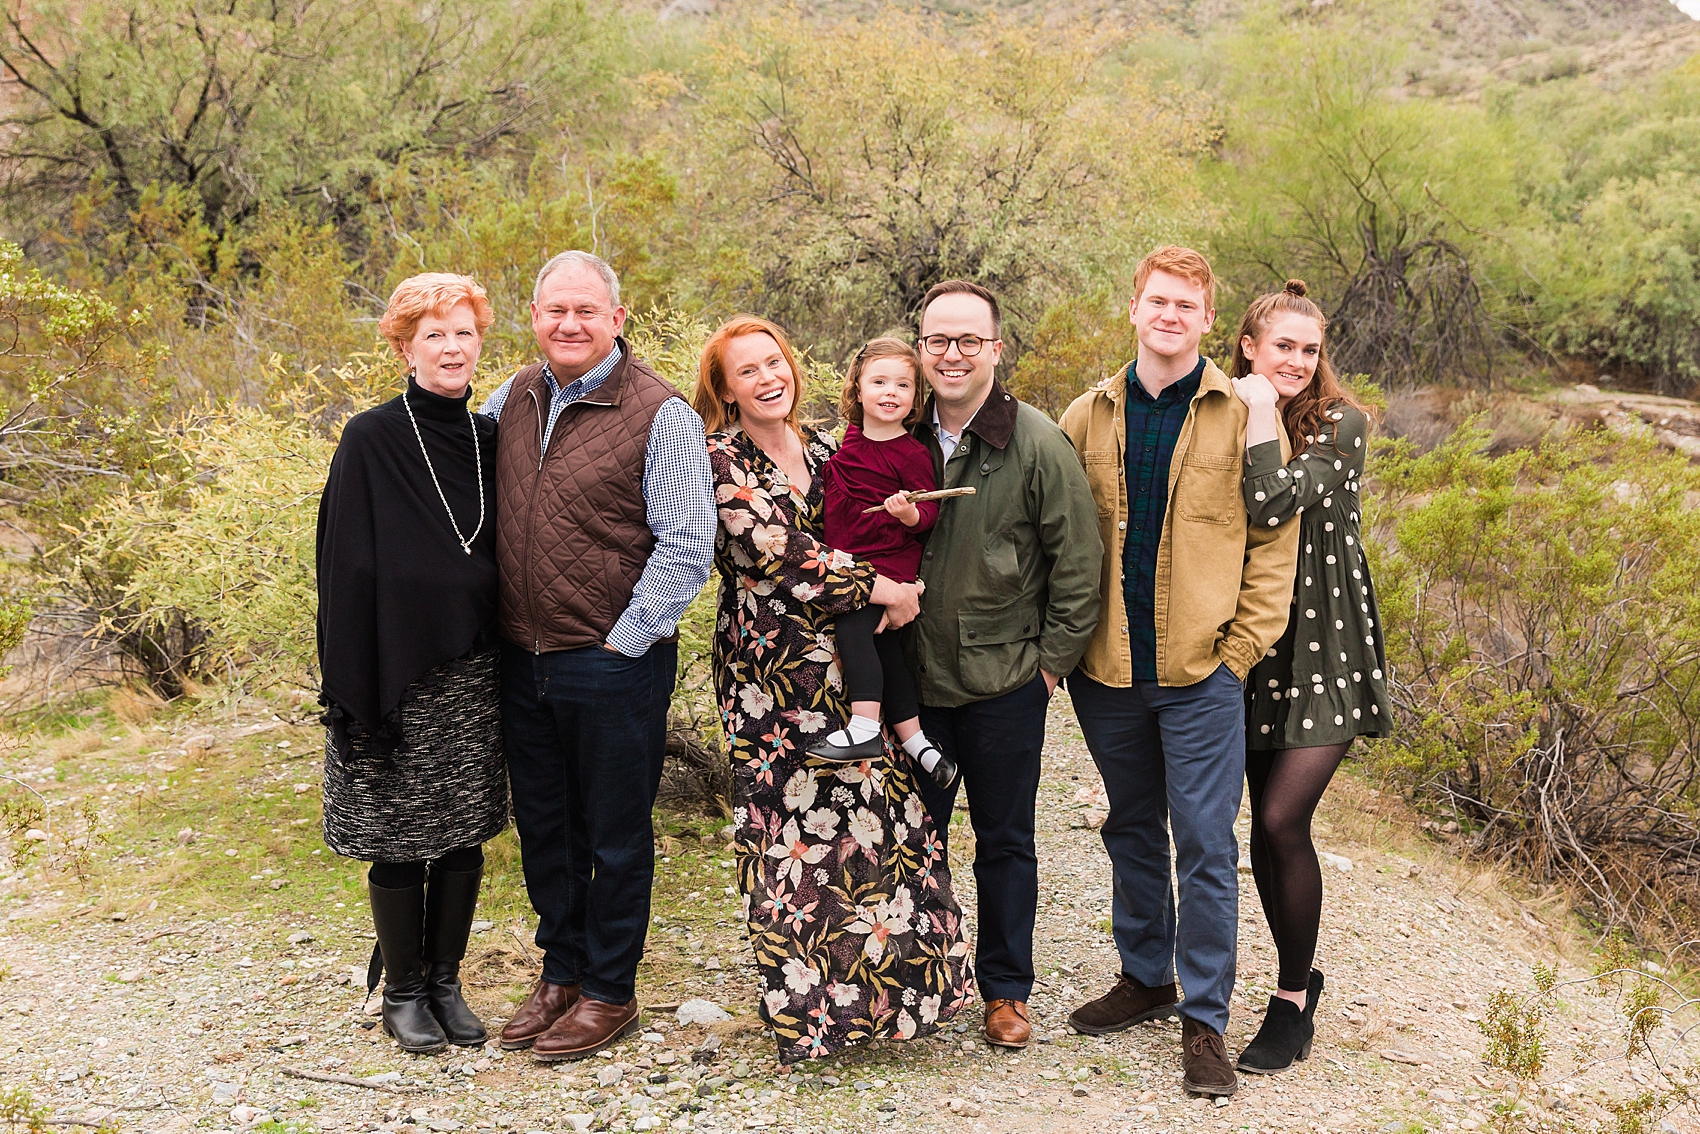 Leah Hope Photography | Scottsdale Phoenix Arizona | Desert Landscape Scenery | Dreamy Draw Recreation Park | Extended Family Photos | Family Pictures | What to Wear | Family Poses